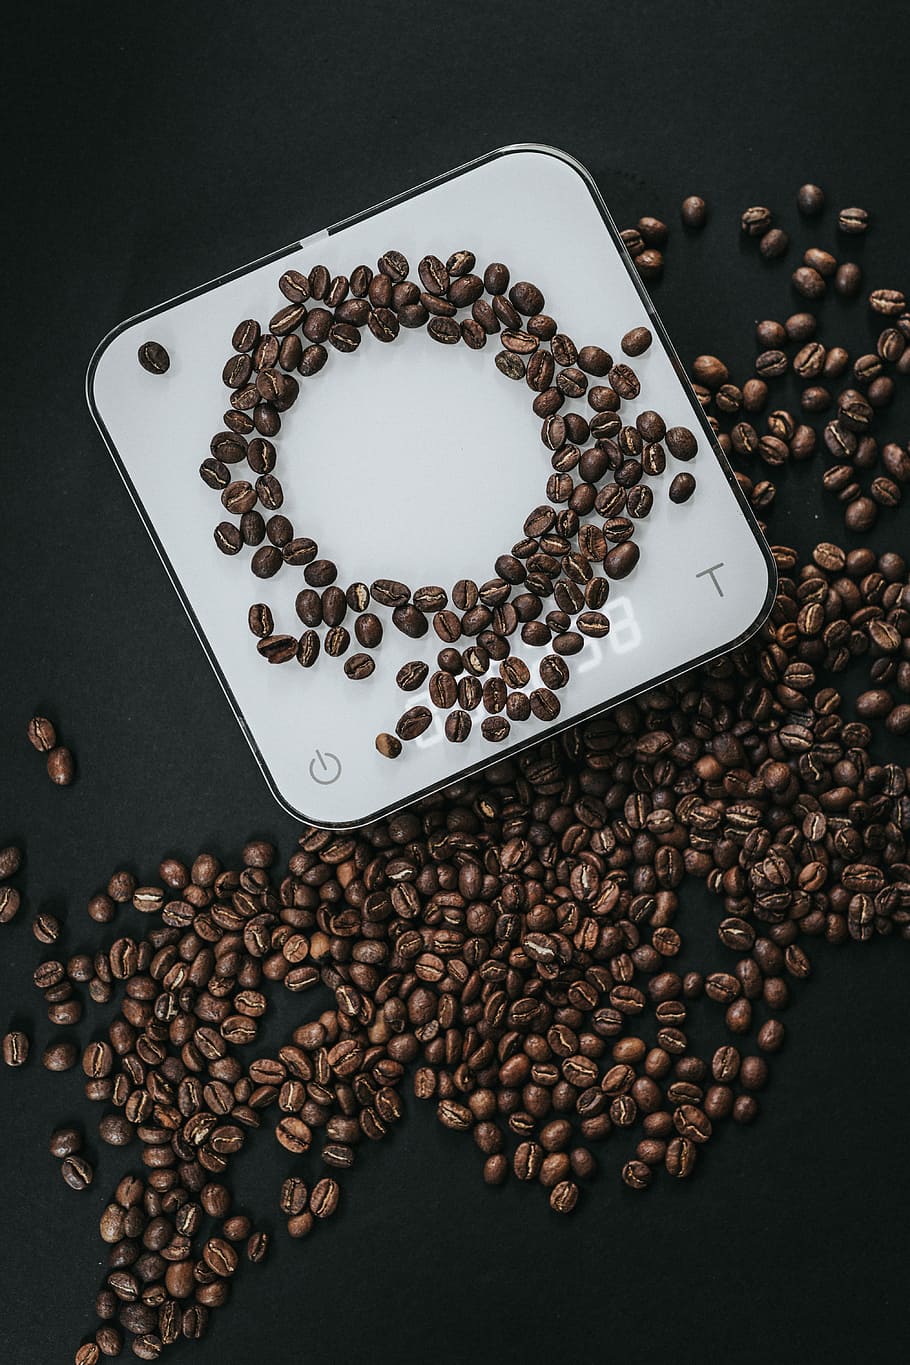 coffee beans on top of white cube scale in closeup photography, coffee beans